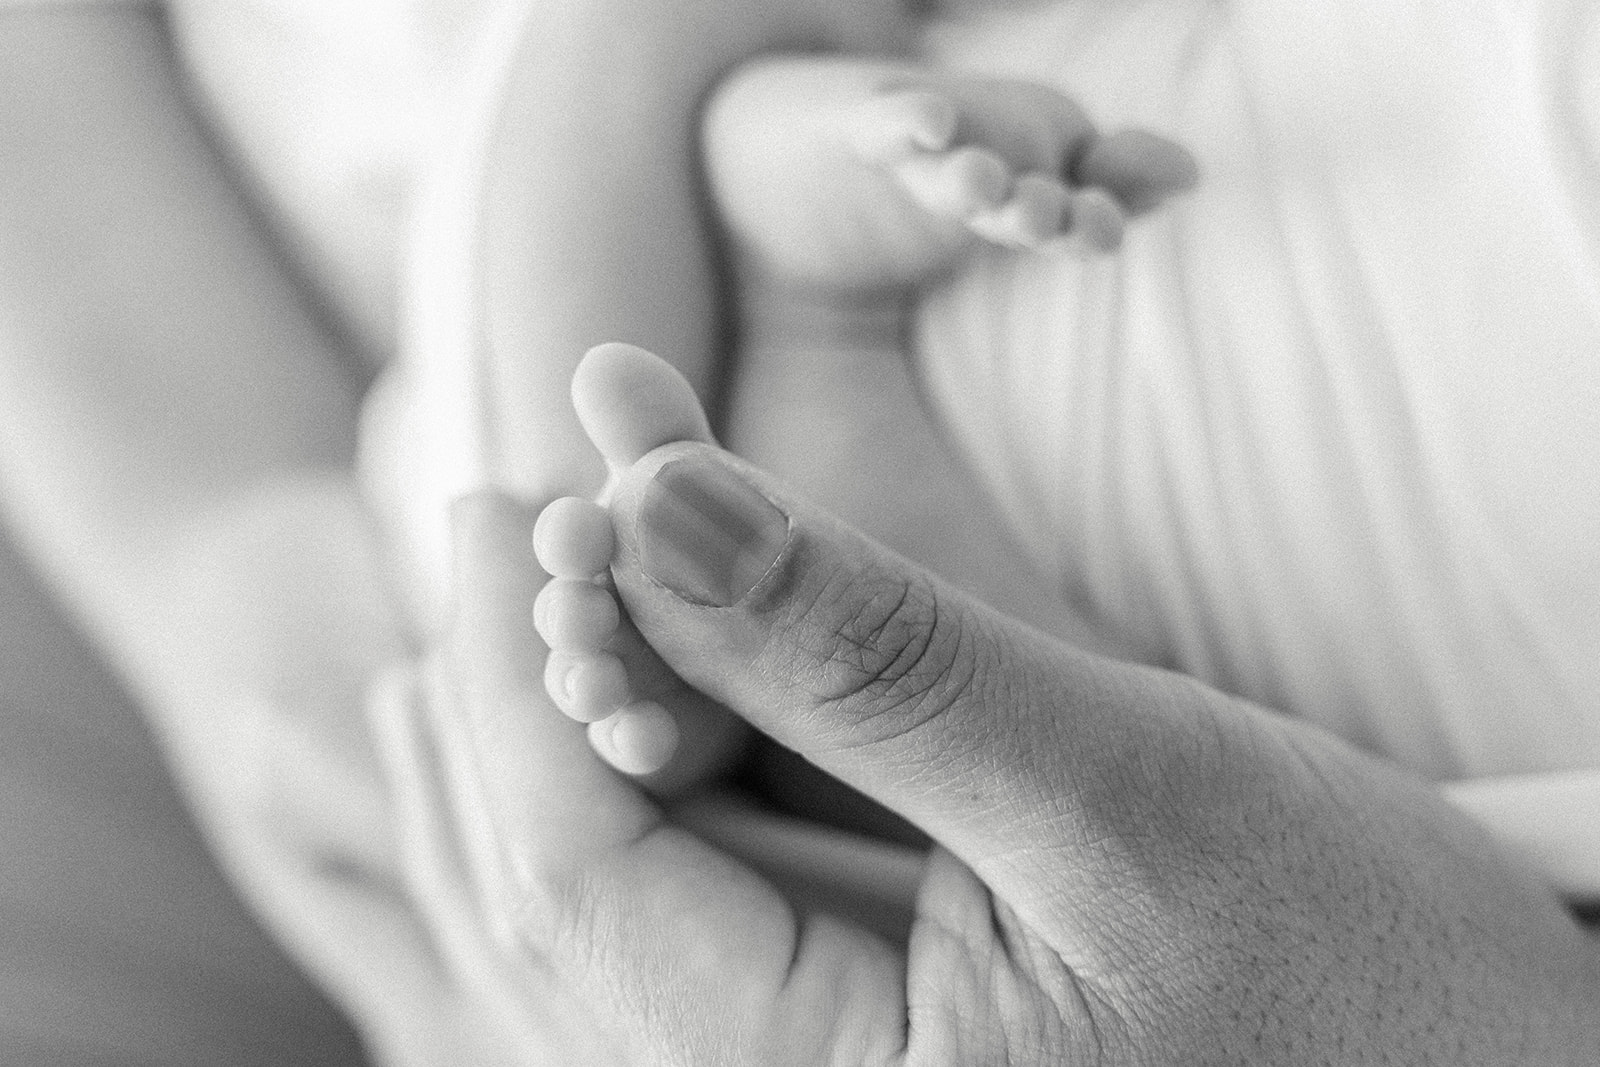 Details of a newborn baby's feet in mom's fingers